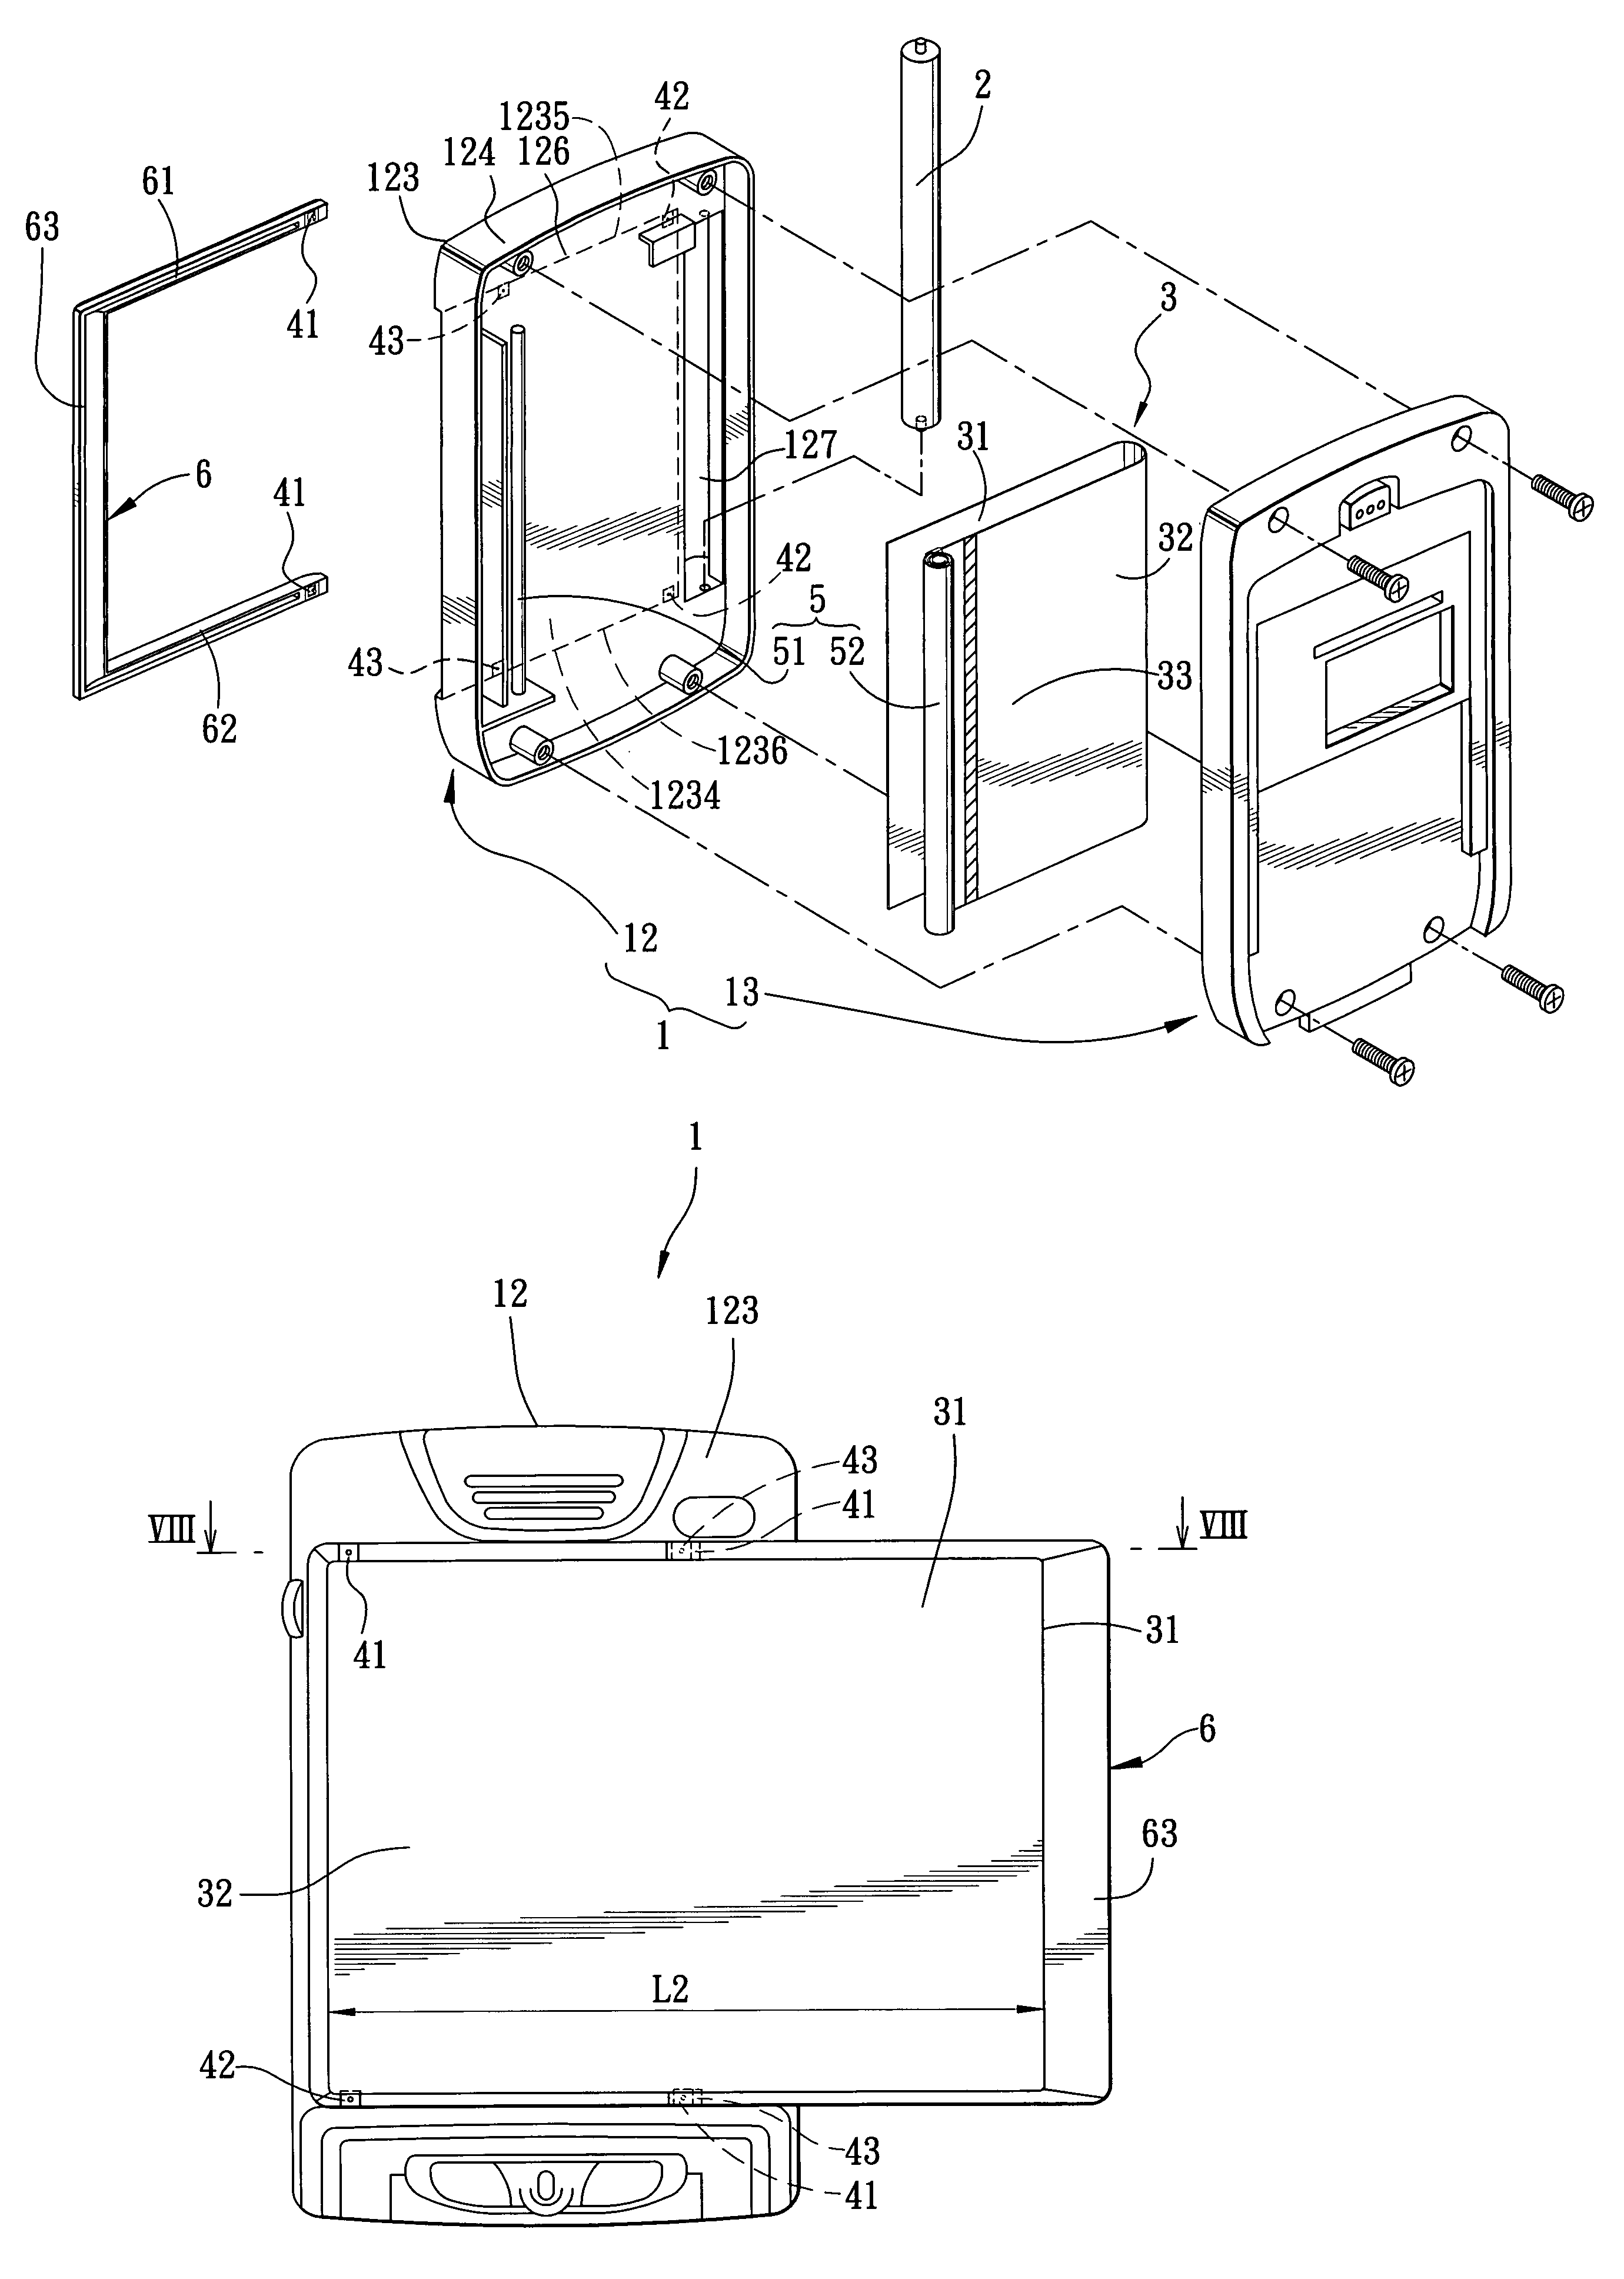 Electronic device having an adjustable display area